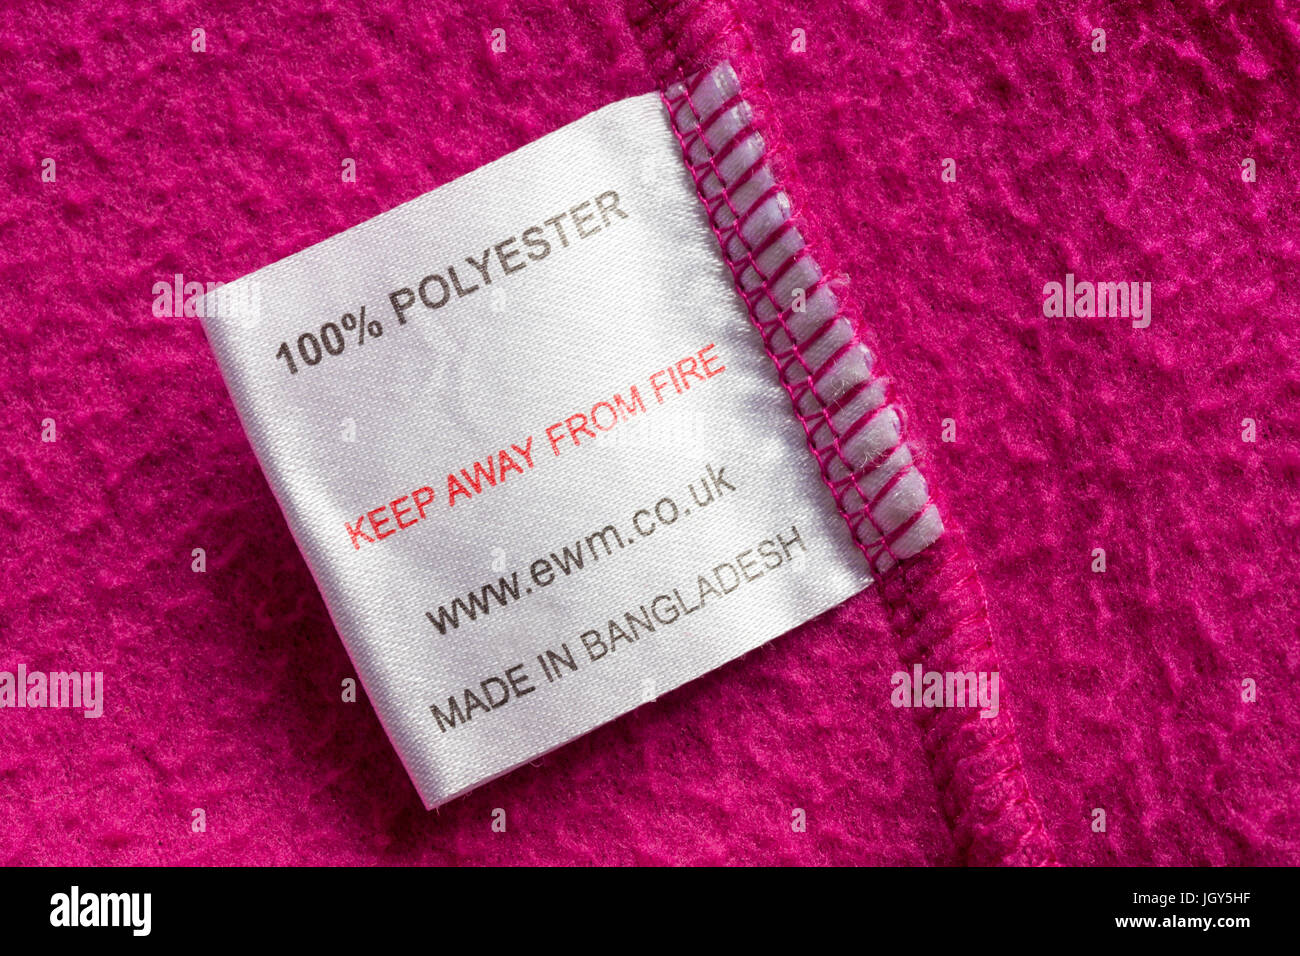 label - 100% polyester keep away from fire made in Bangladesh in girls pink  fleece from The Edinburgh Woollen Mill collection of kids clothing Stock  Photo - Alamy